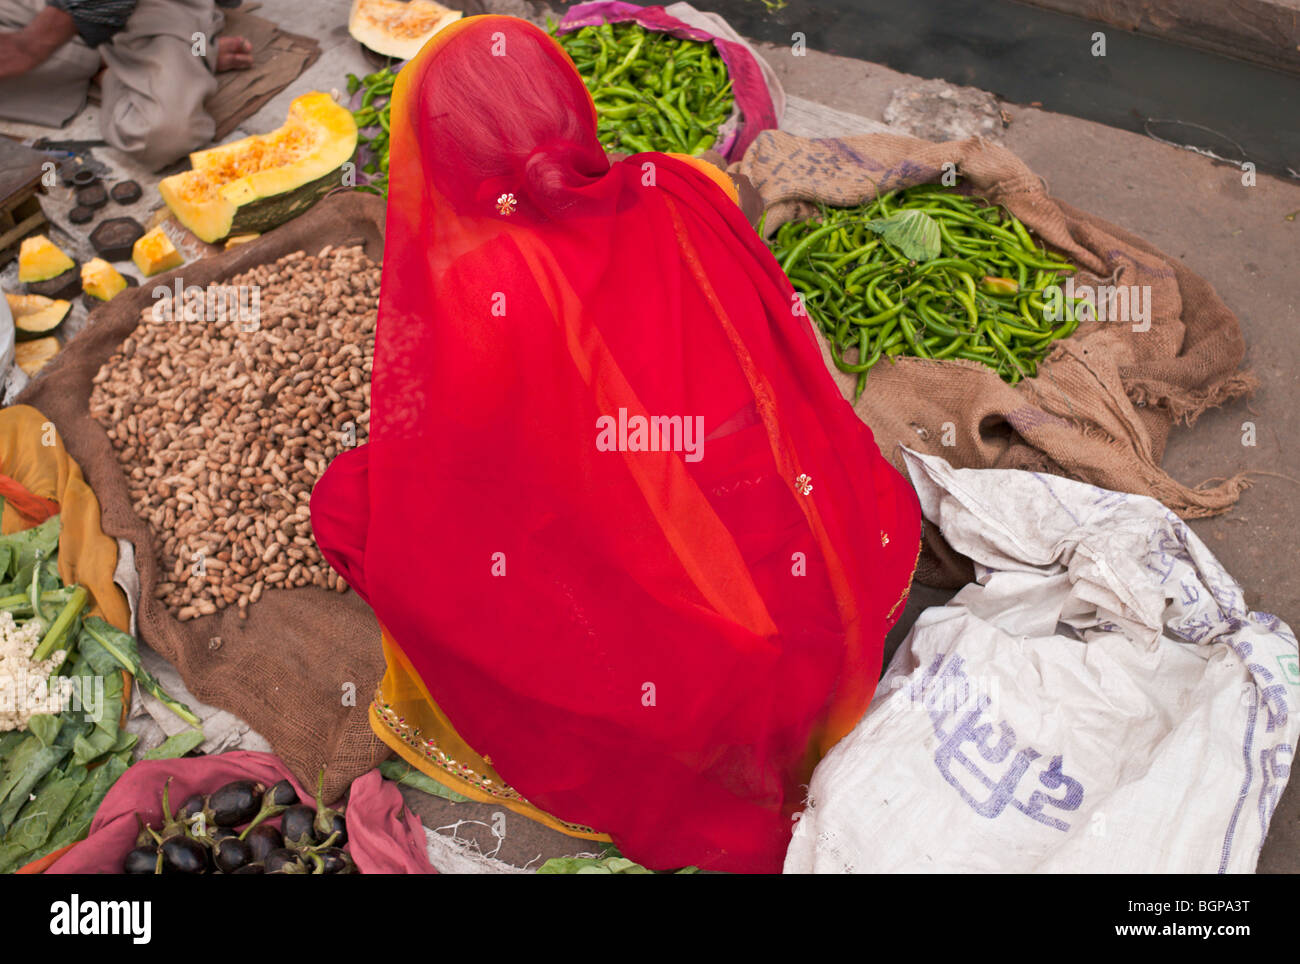 Rajasthani woman in red and yellow saree, sari selling nuts and green chillies in Jaipur market, Rajasthan, India Stock Photo